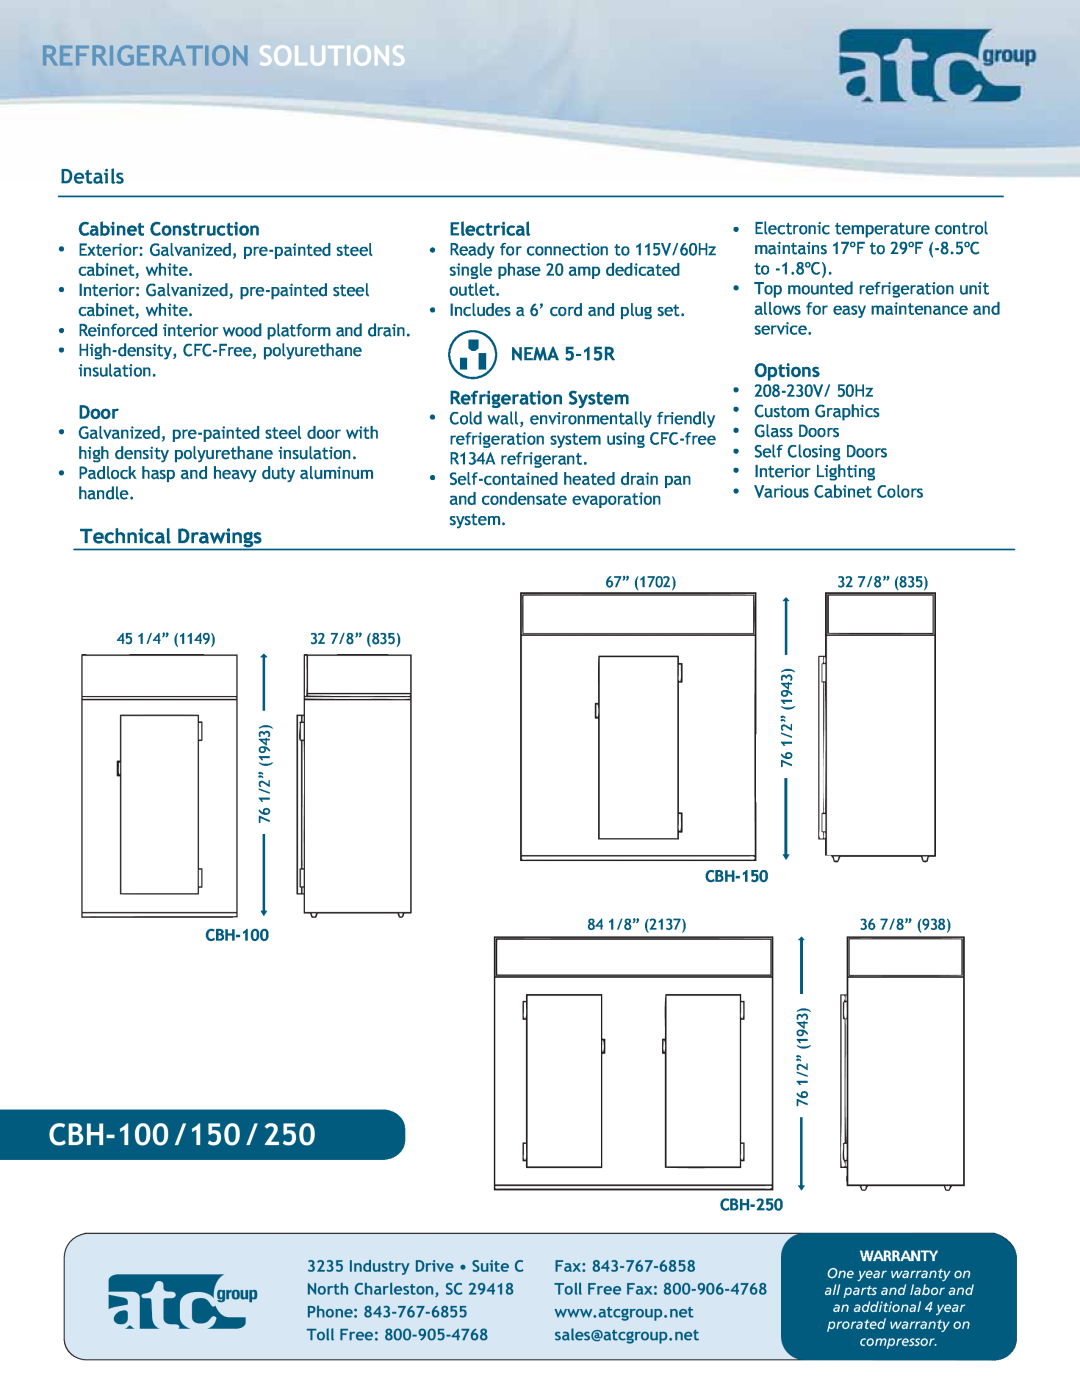 ATC Group CBH-100 /150 /250, Refrigeration Solutions, Details, Technical Drawings, Cabinet Construction, Door, Options 